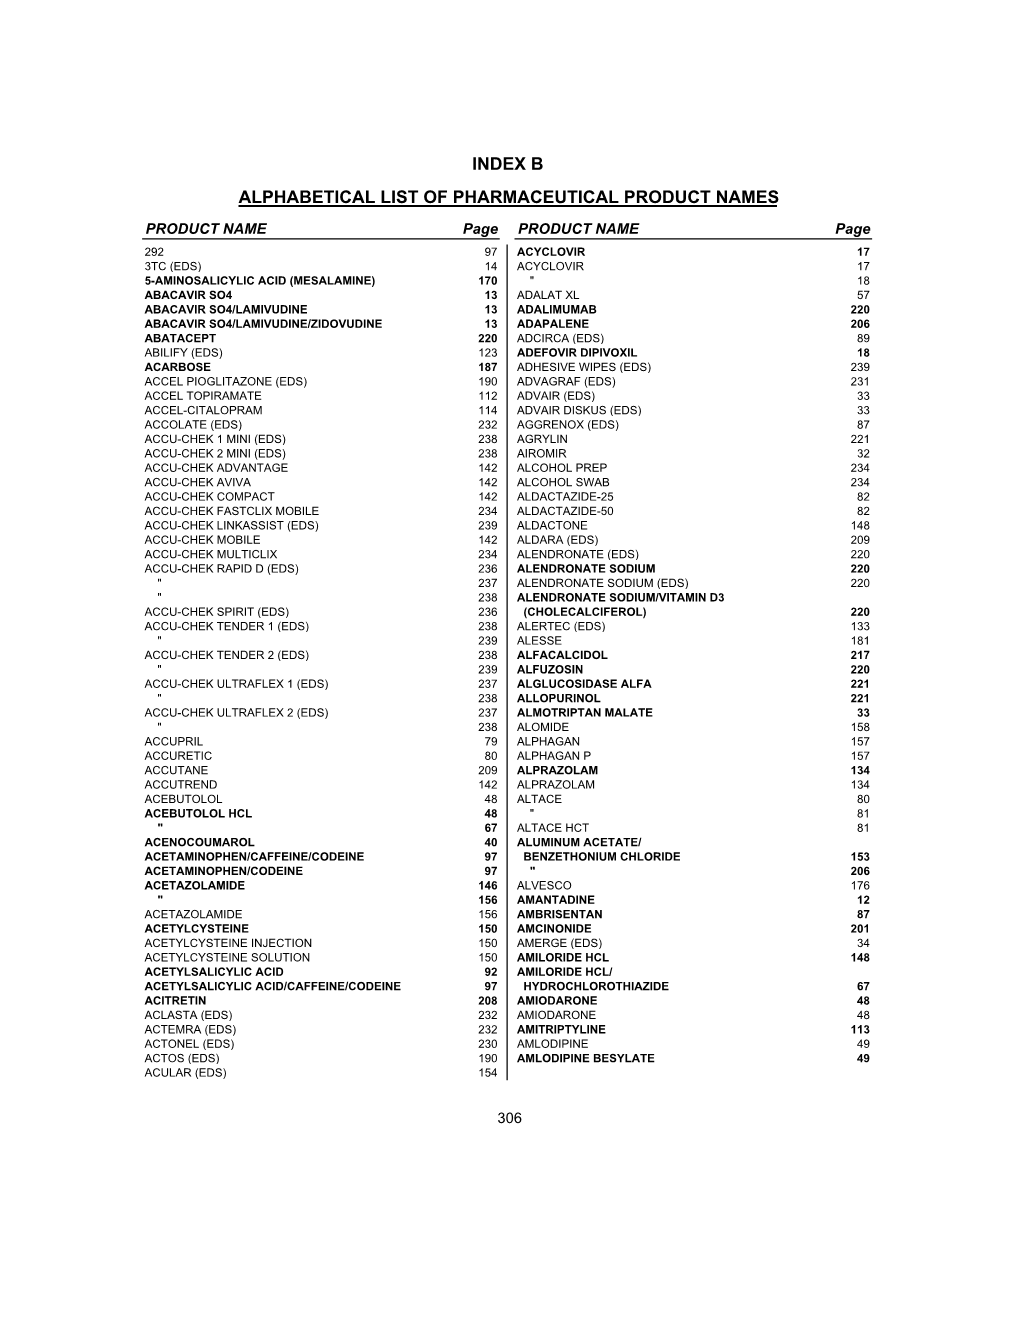 Index B Alphabetical List of Pharmaceutical Product Names